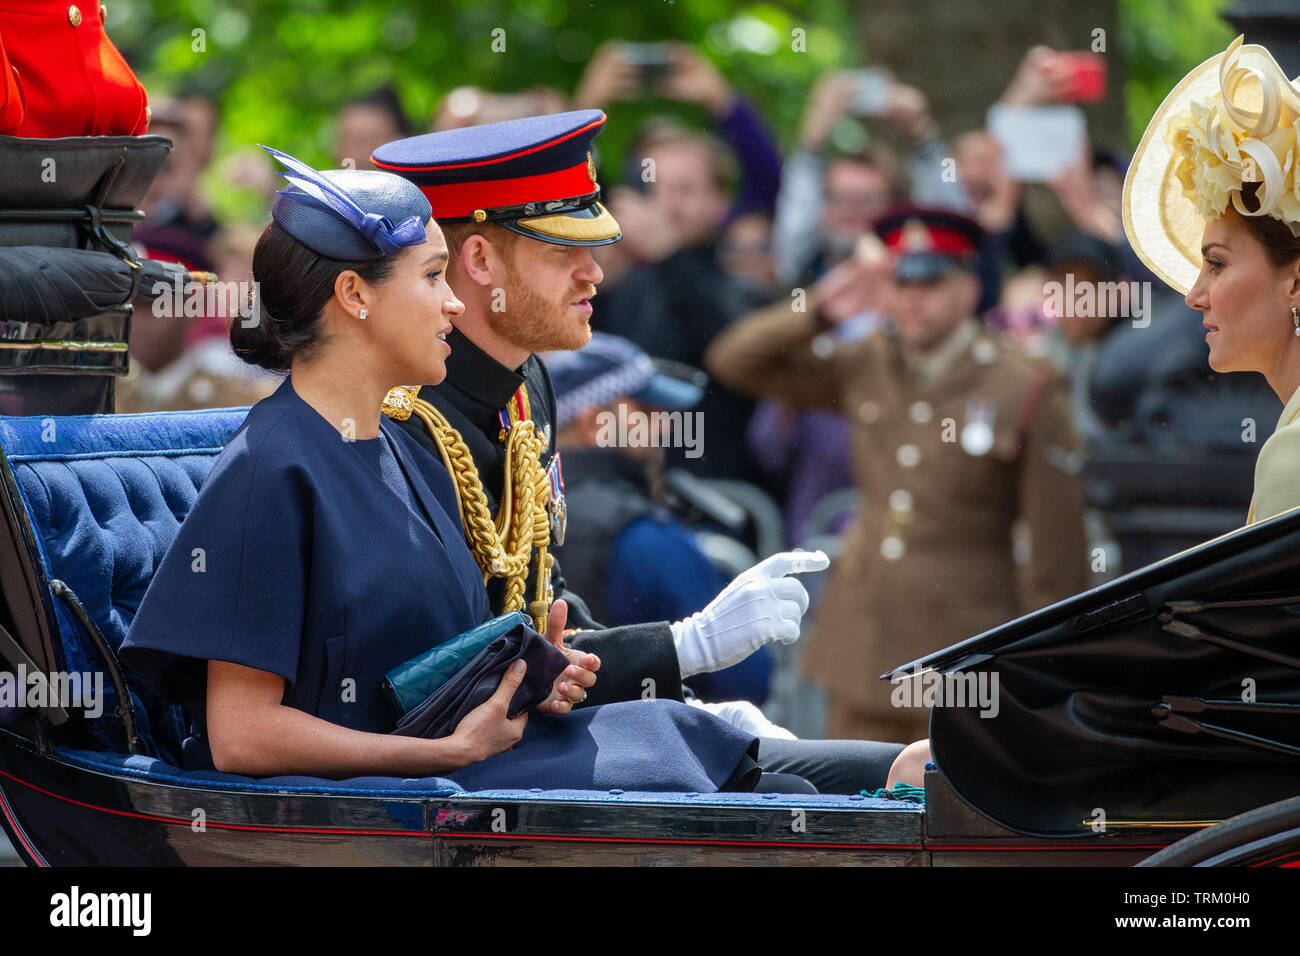 Picture dated June 8th shows Meghan,Duchess of Sussex,Prince Harry and Catherine Duchess of Cambridge at the Trooping the Colour in London today.   The Queen's official birthday has been marked with the annual Trooping the Colour parade. She was joined by members of her family and thousands of spectators to watch the display in Horse Guards Parade in Whitehall. The Prince of Wales, the Duchess of Cornwall, the Duke and Duchess of Cambridge and the Duke and Duchess of Sussex all attended. The Queen celebrated her 93rd birthday in April. The royal colonels - the Prince of Wales, colonel of the W Stock Photo